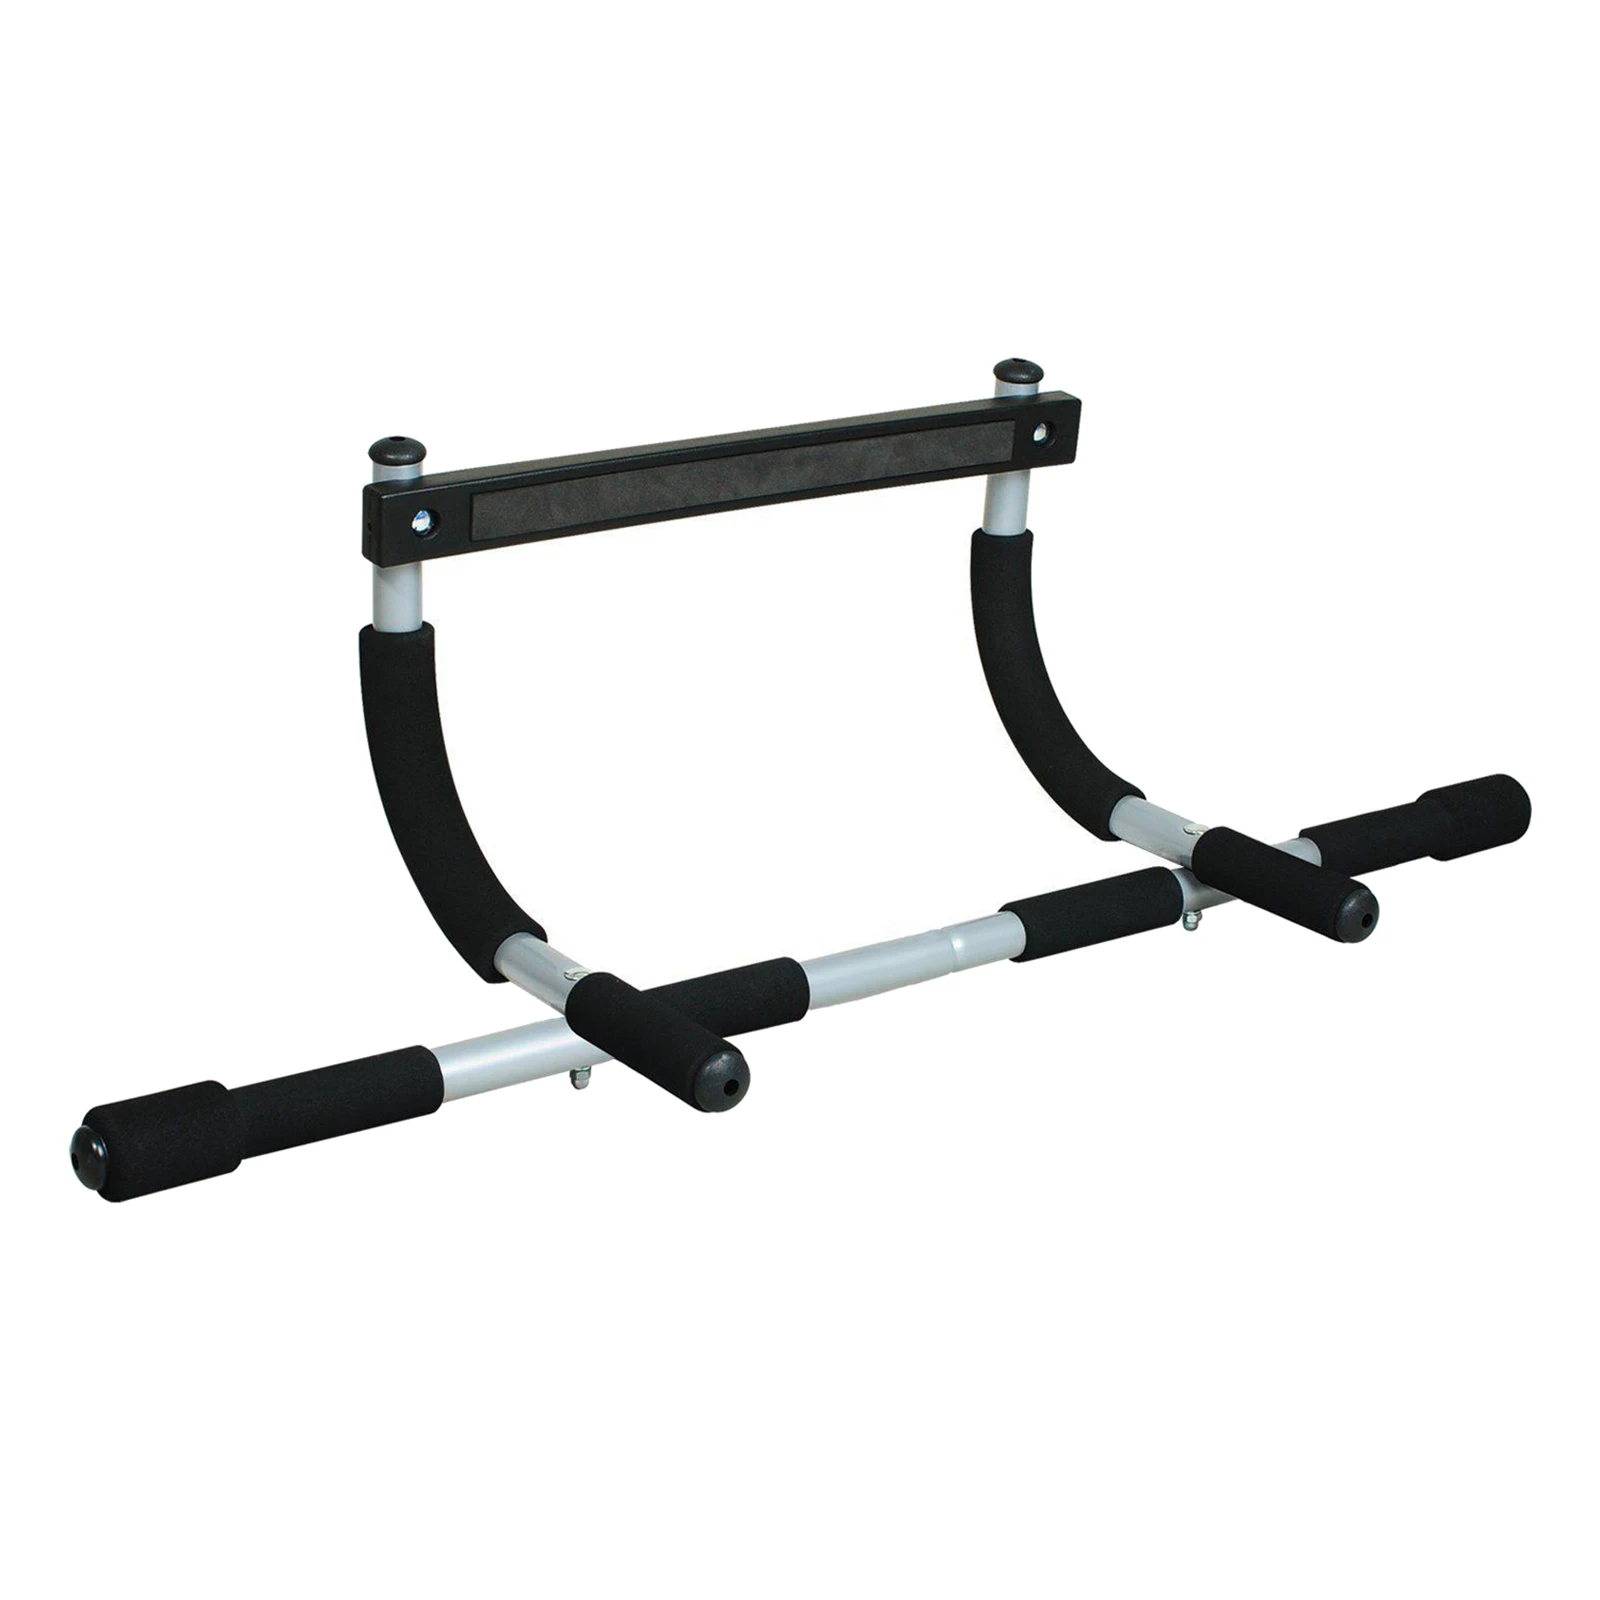 Pull Up Bar Chin Up Exercise Tough Entry Home Gym Body Equipment Training Upper